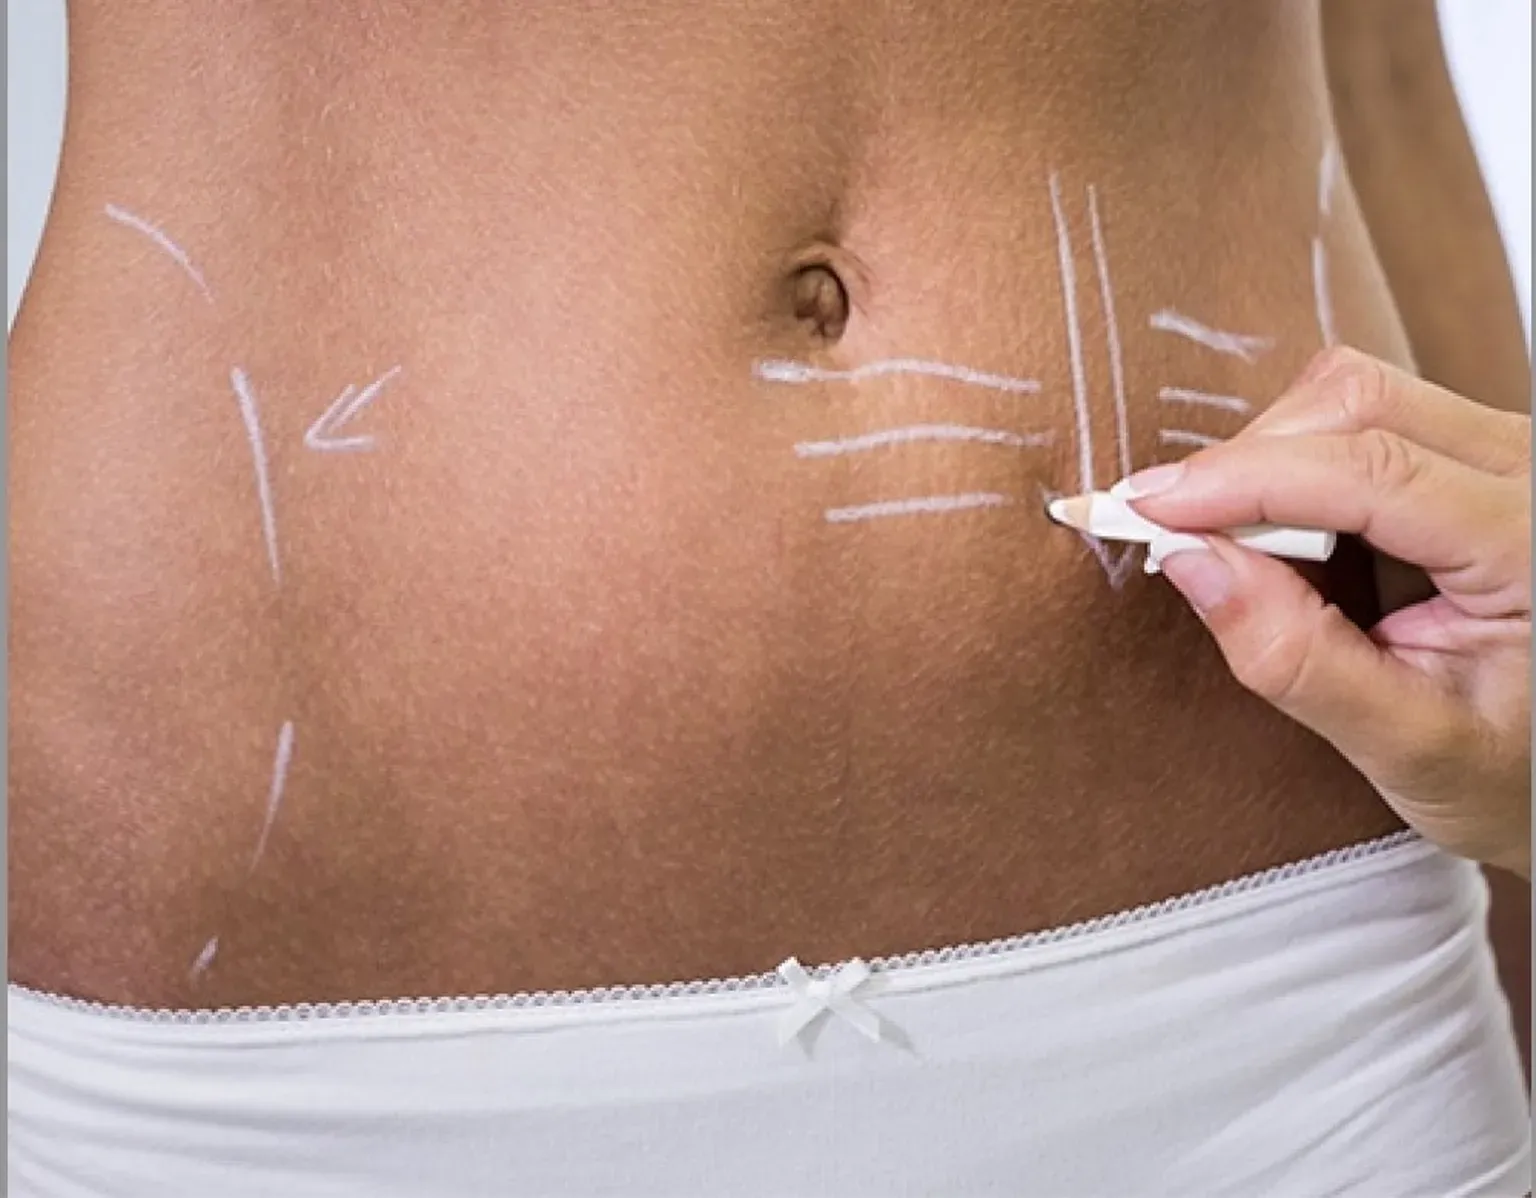 What happens to your belly button during a tummy tuck procedure